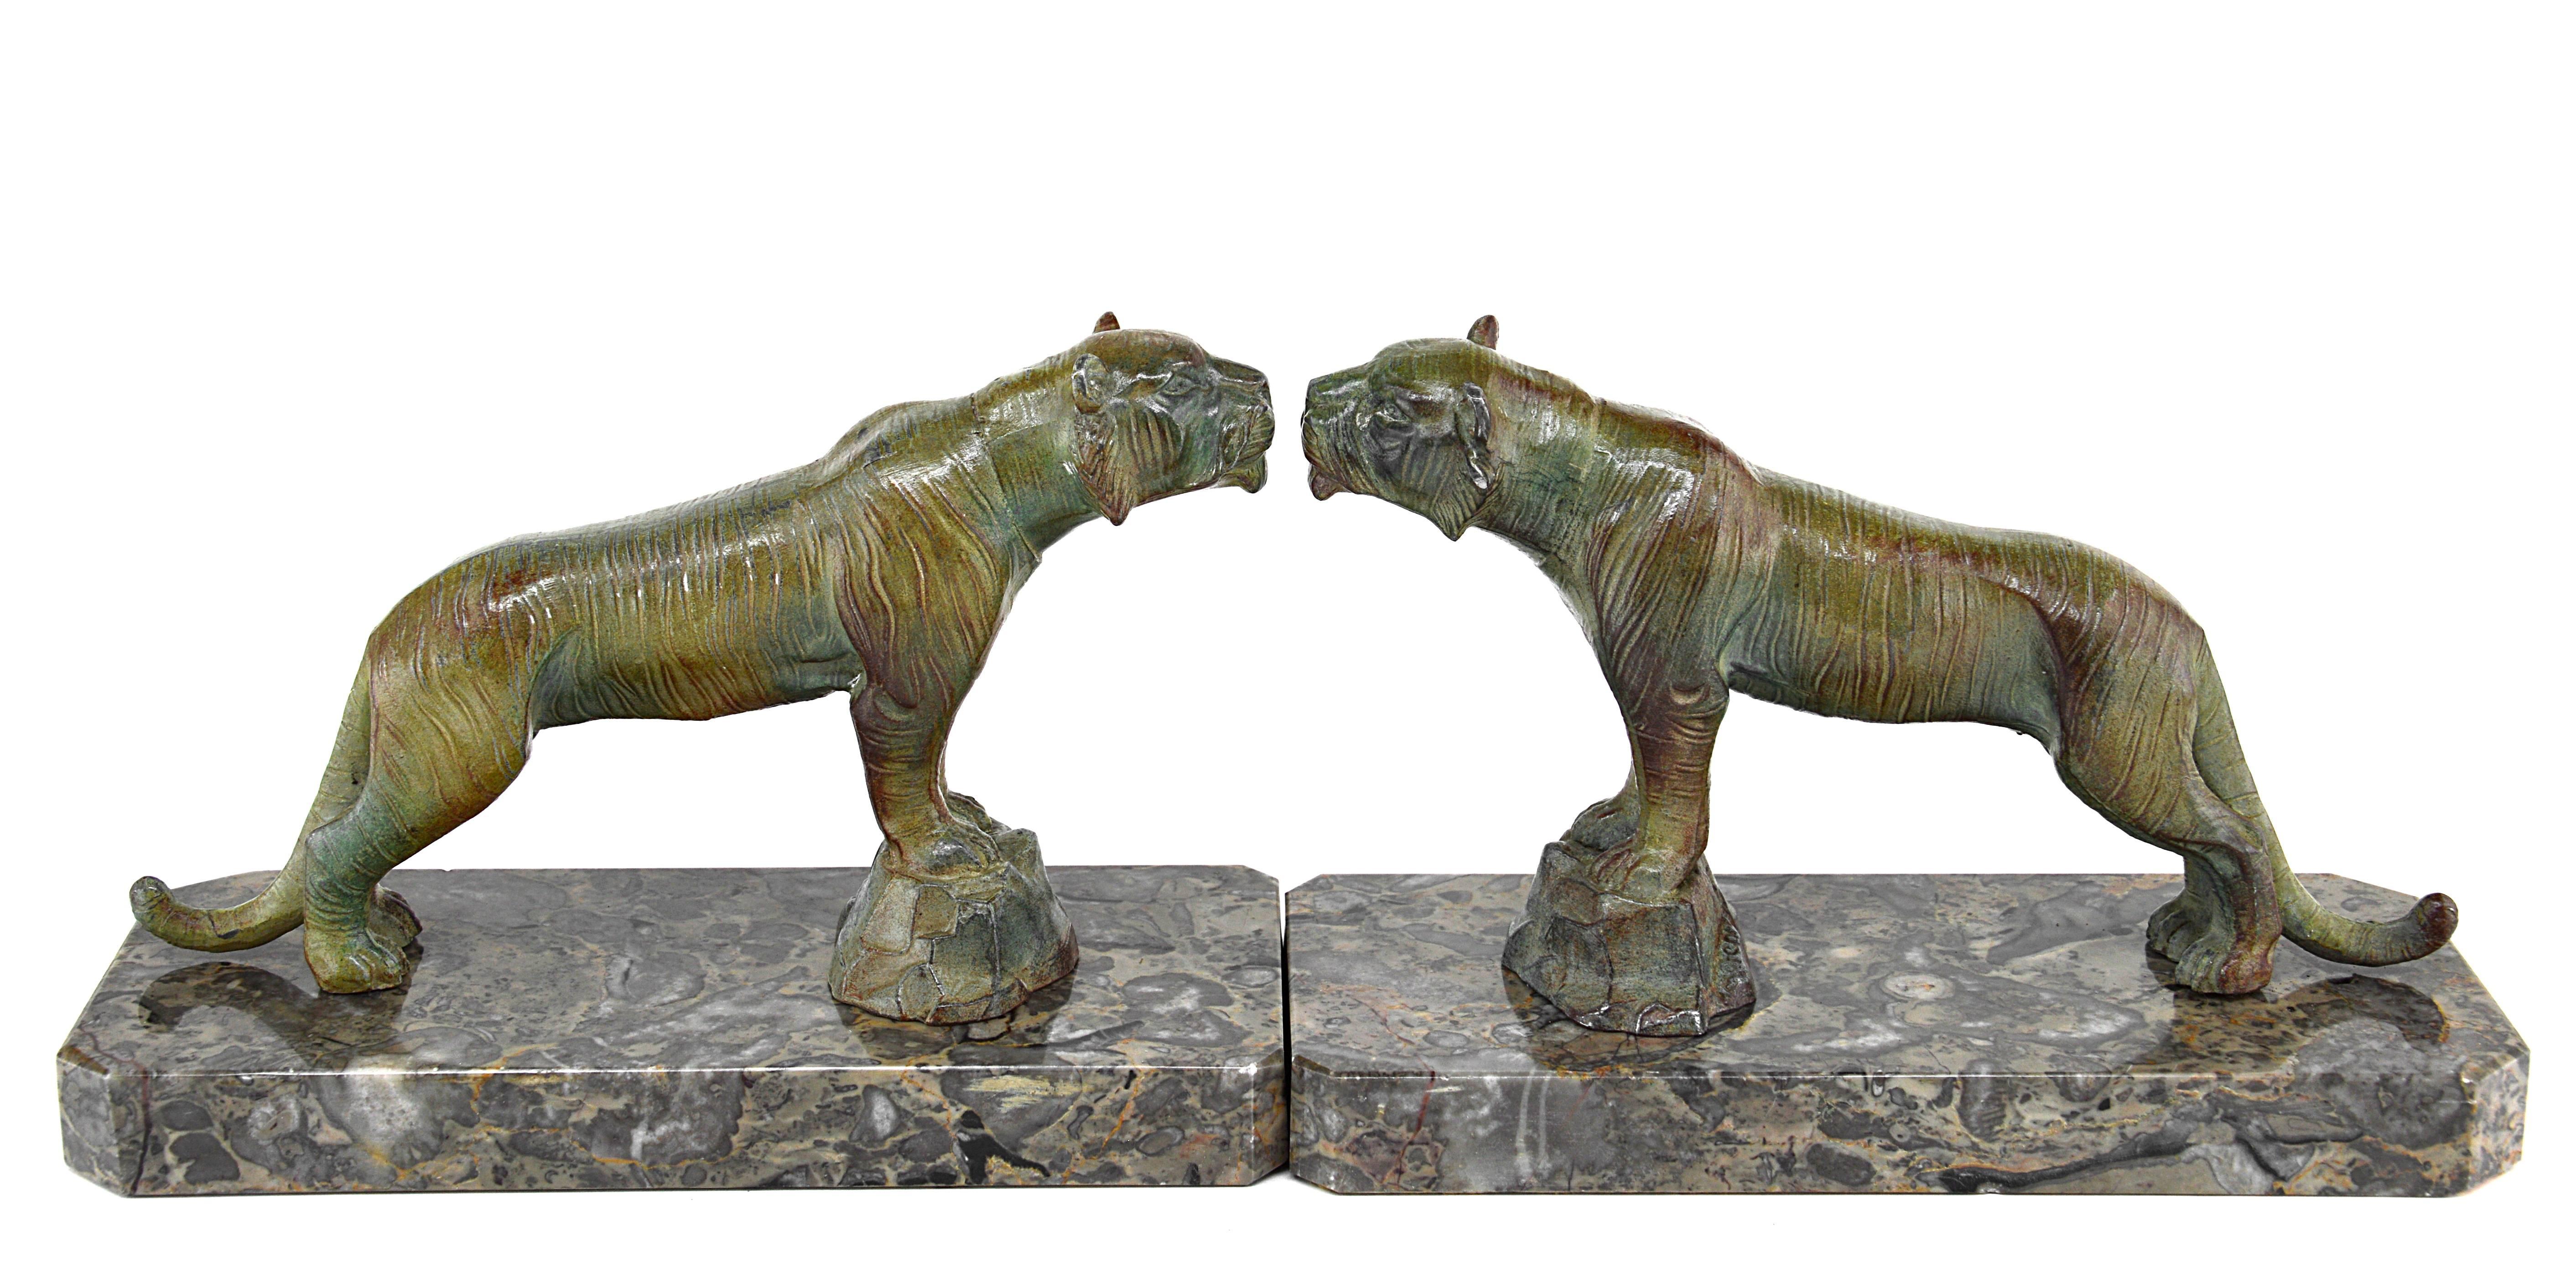 French Art Deco tiger bookends by Hippolyte Moreau, late 1910s. Two spelter tigers with their original patina on two beautiful marble bases. Signed 